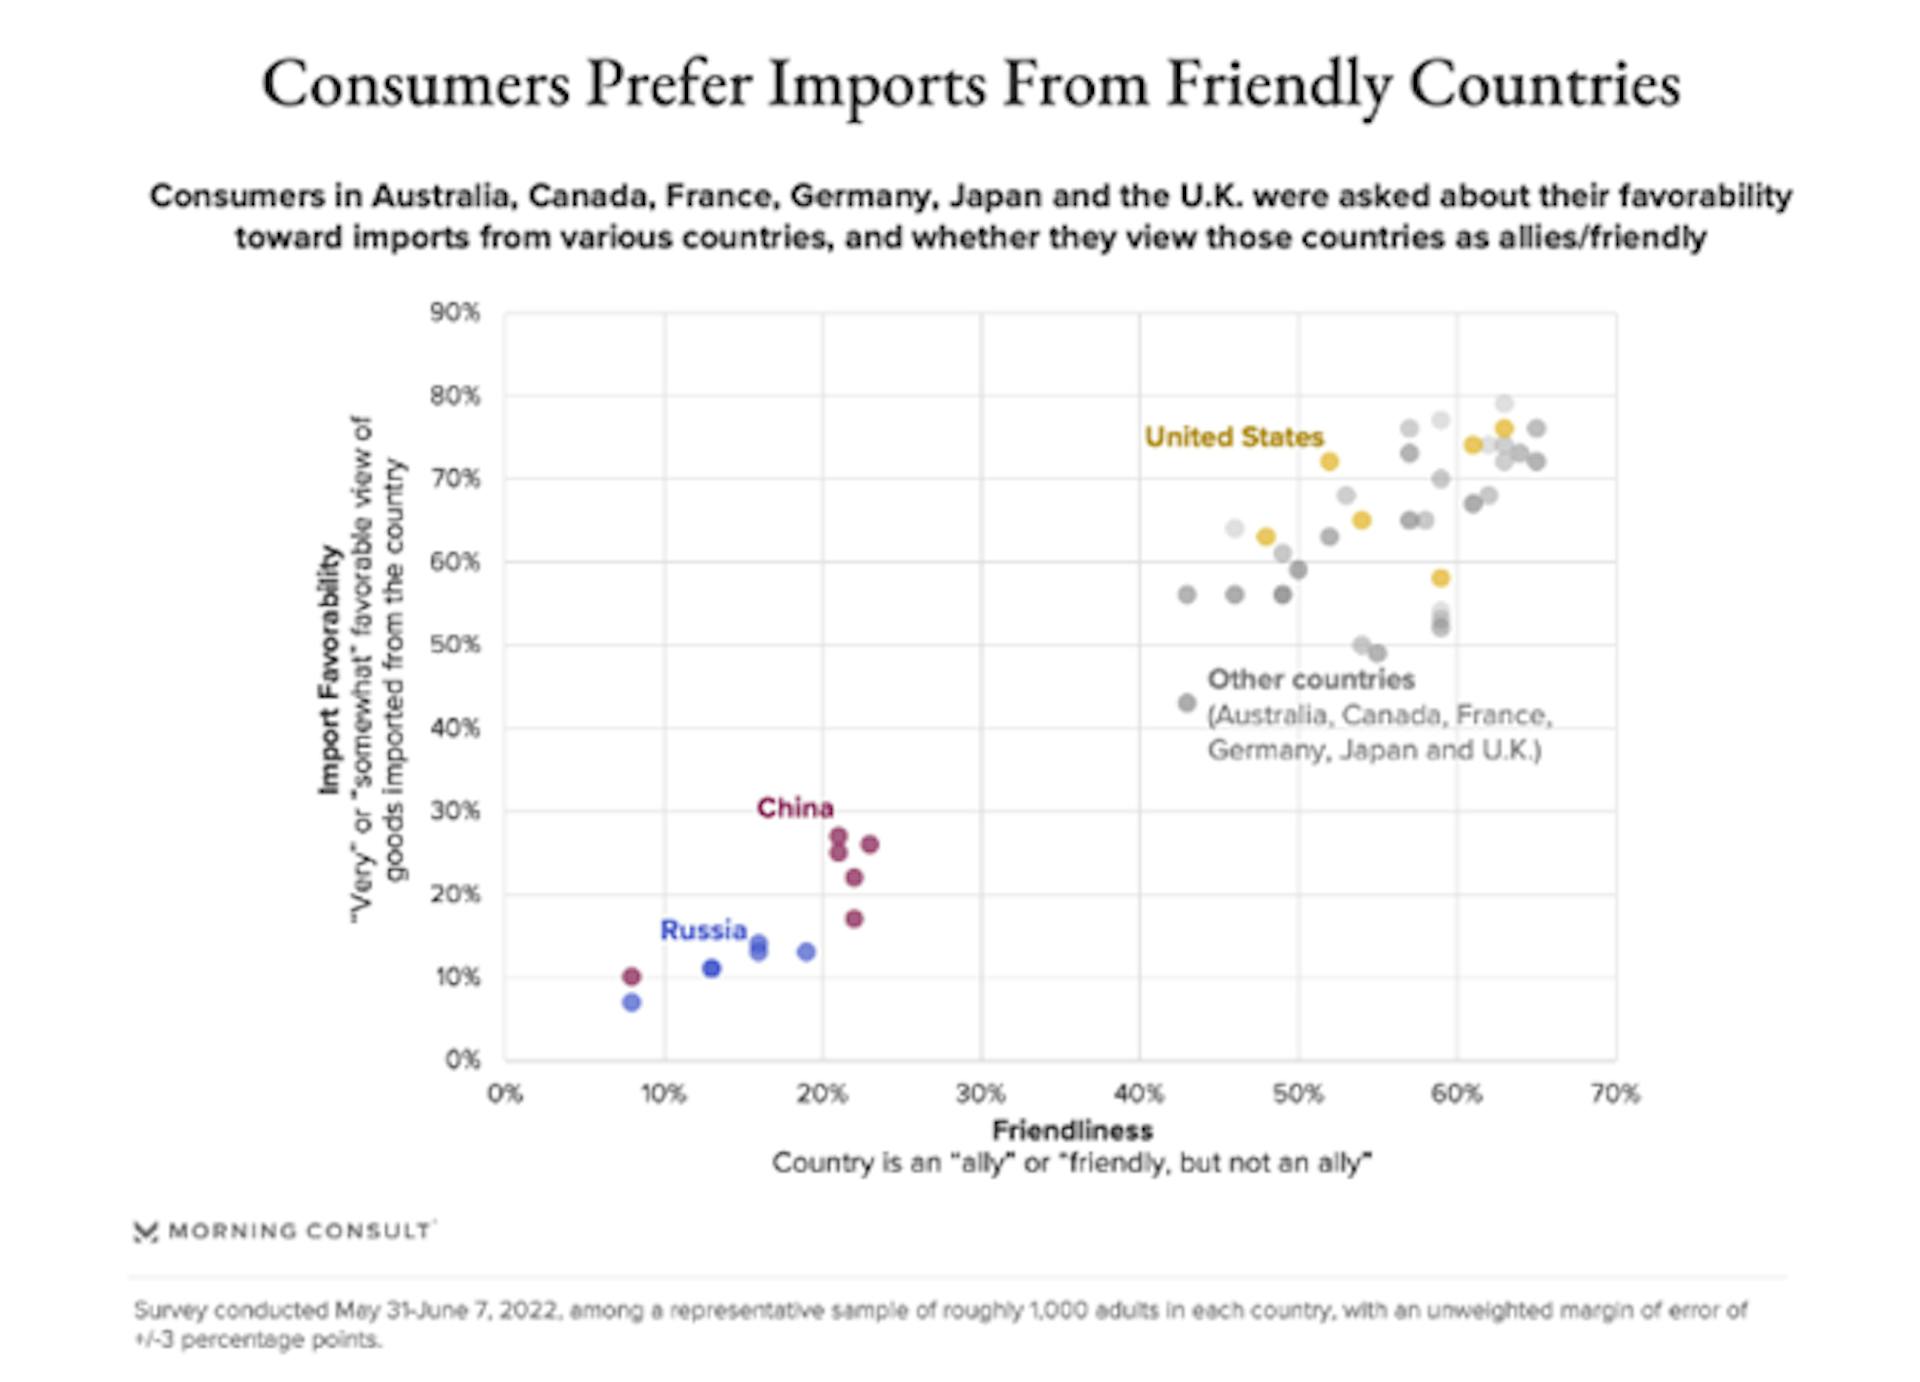 Imports From Allies are Preferred by Customers